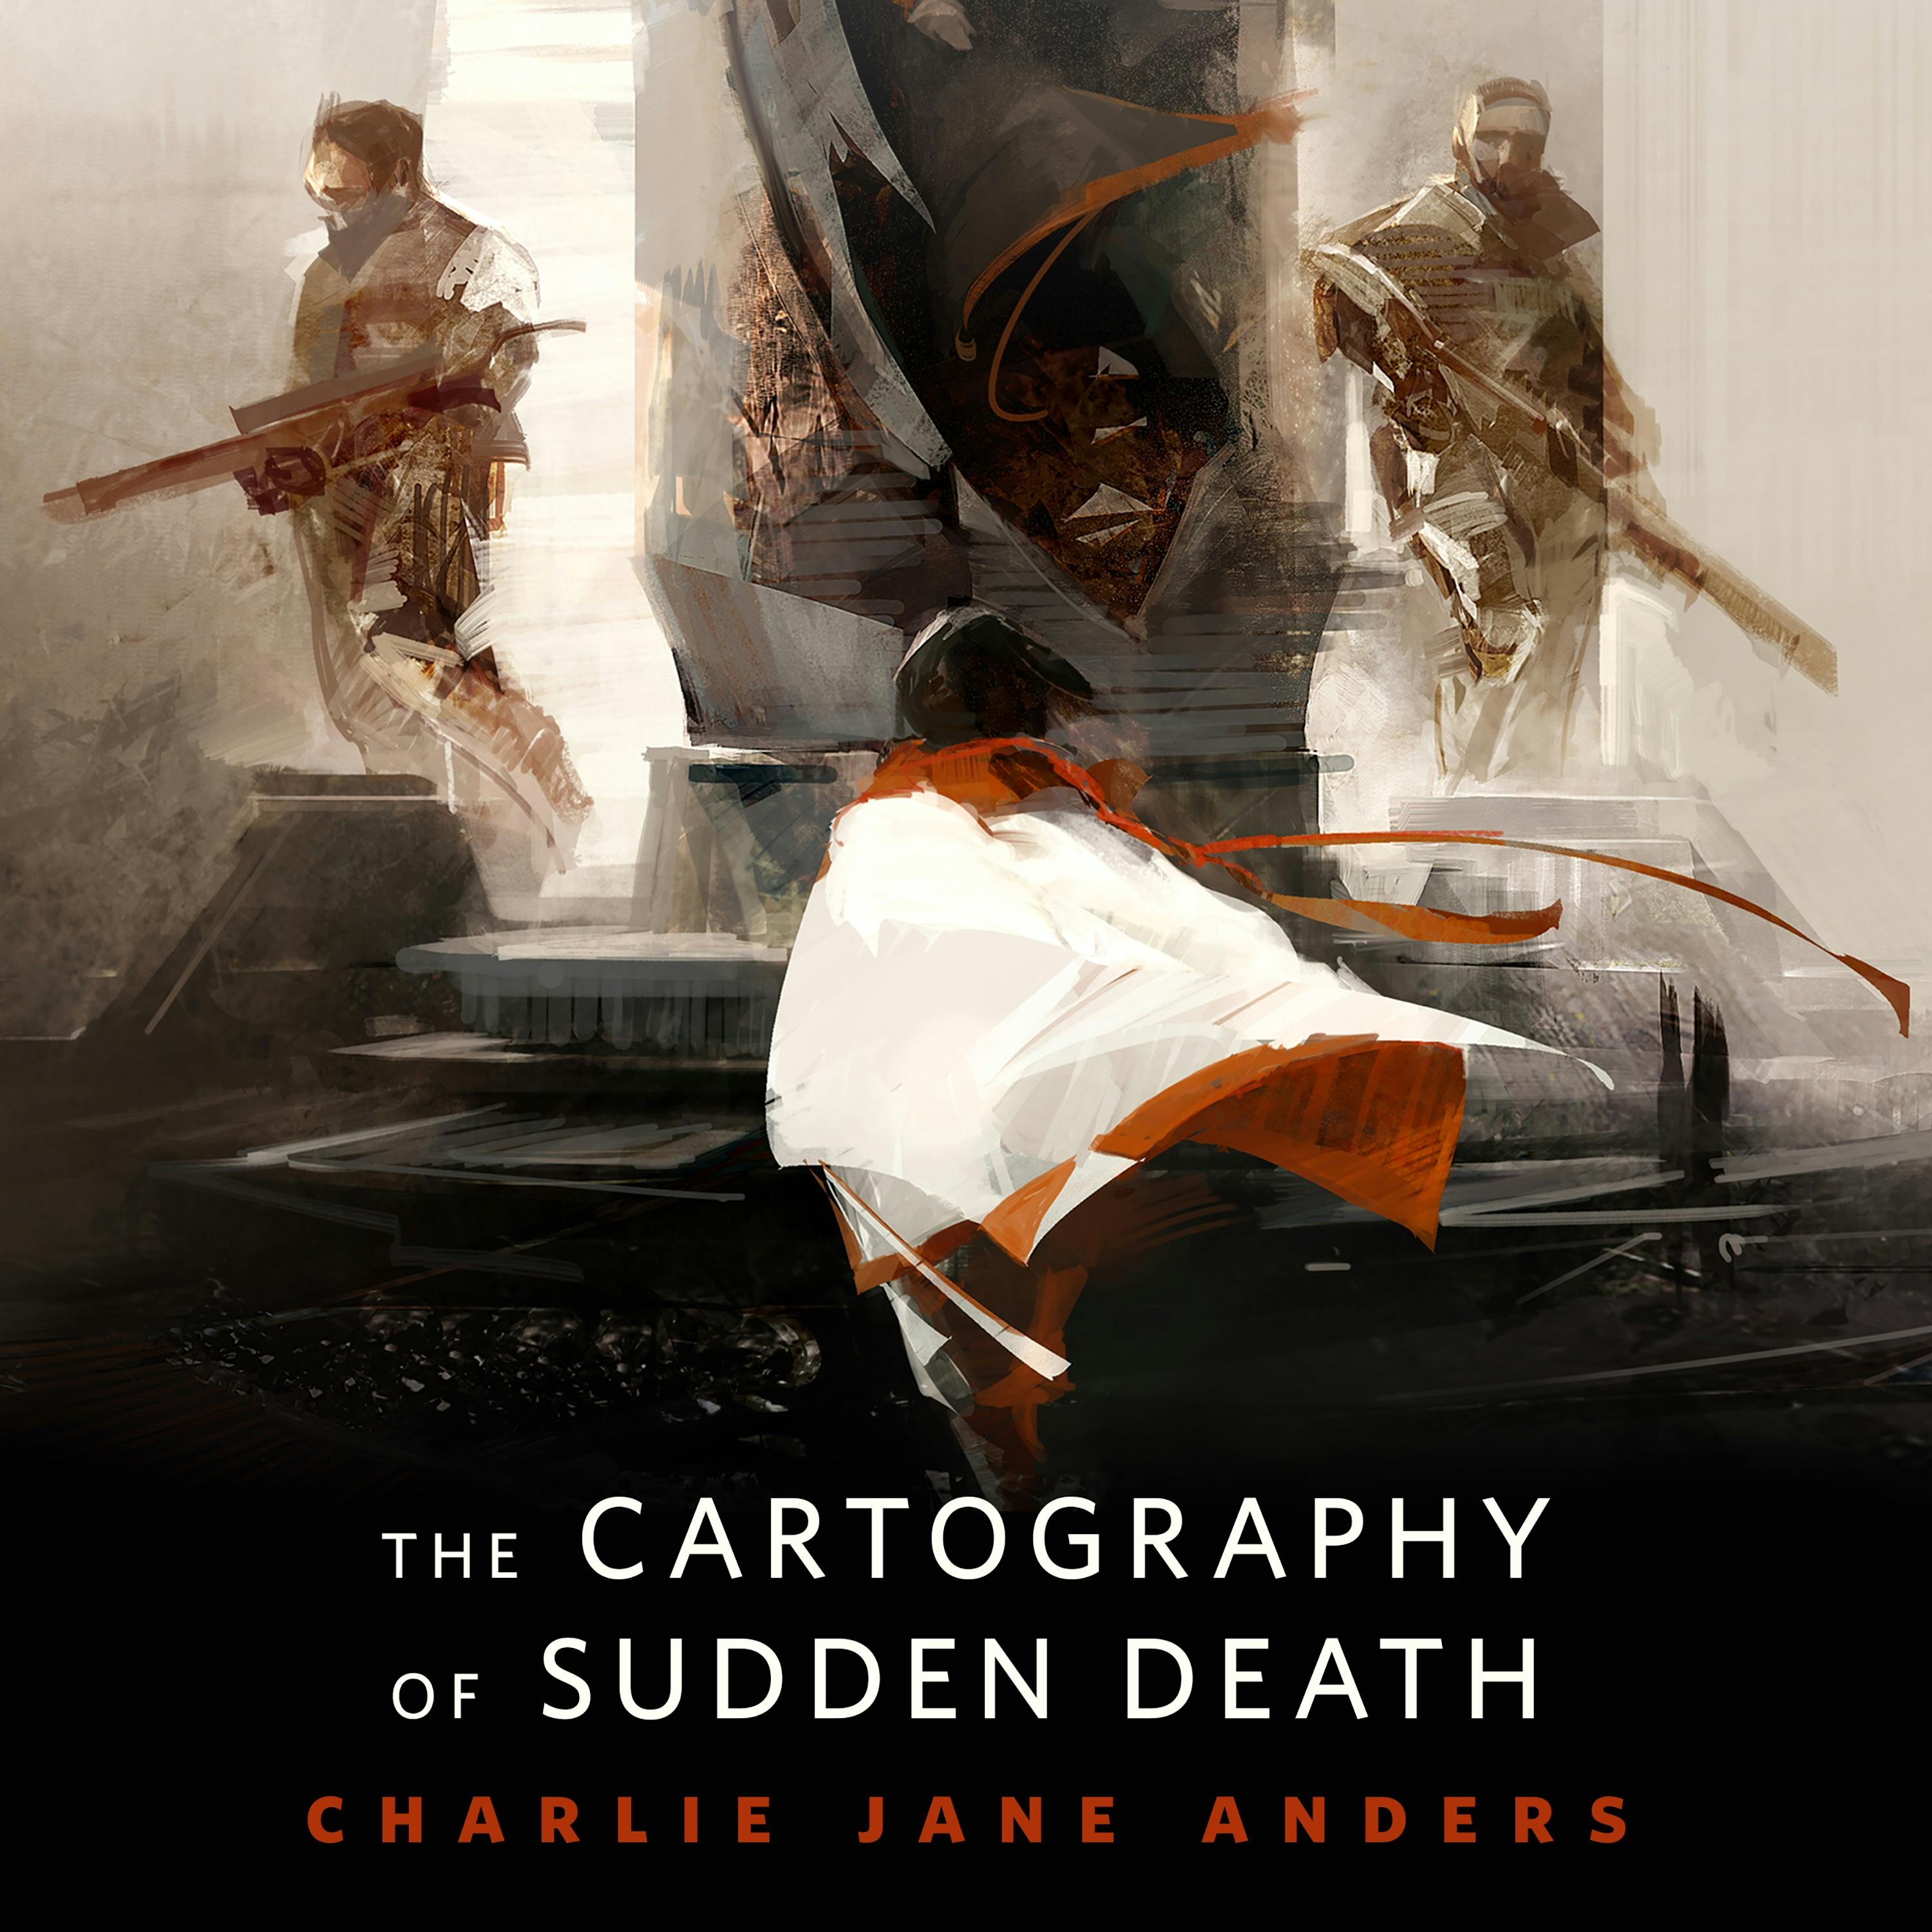 Image of The Cartography of Sudden Death